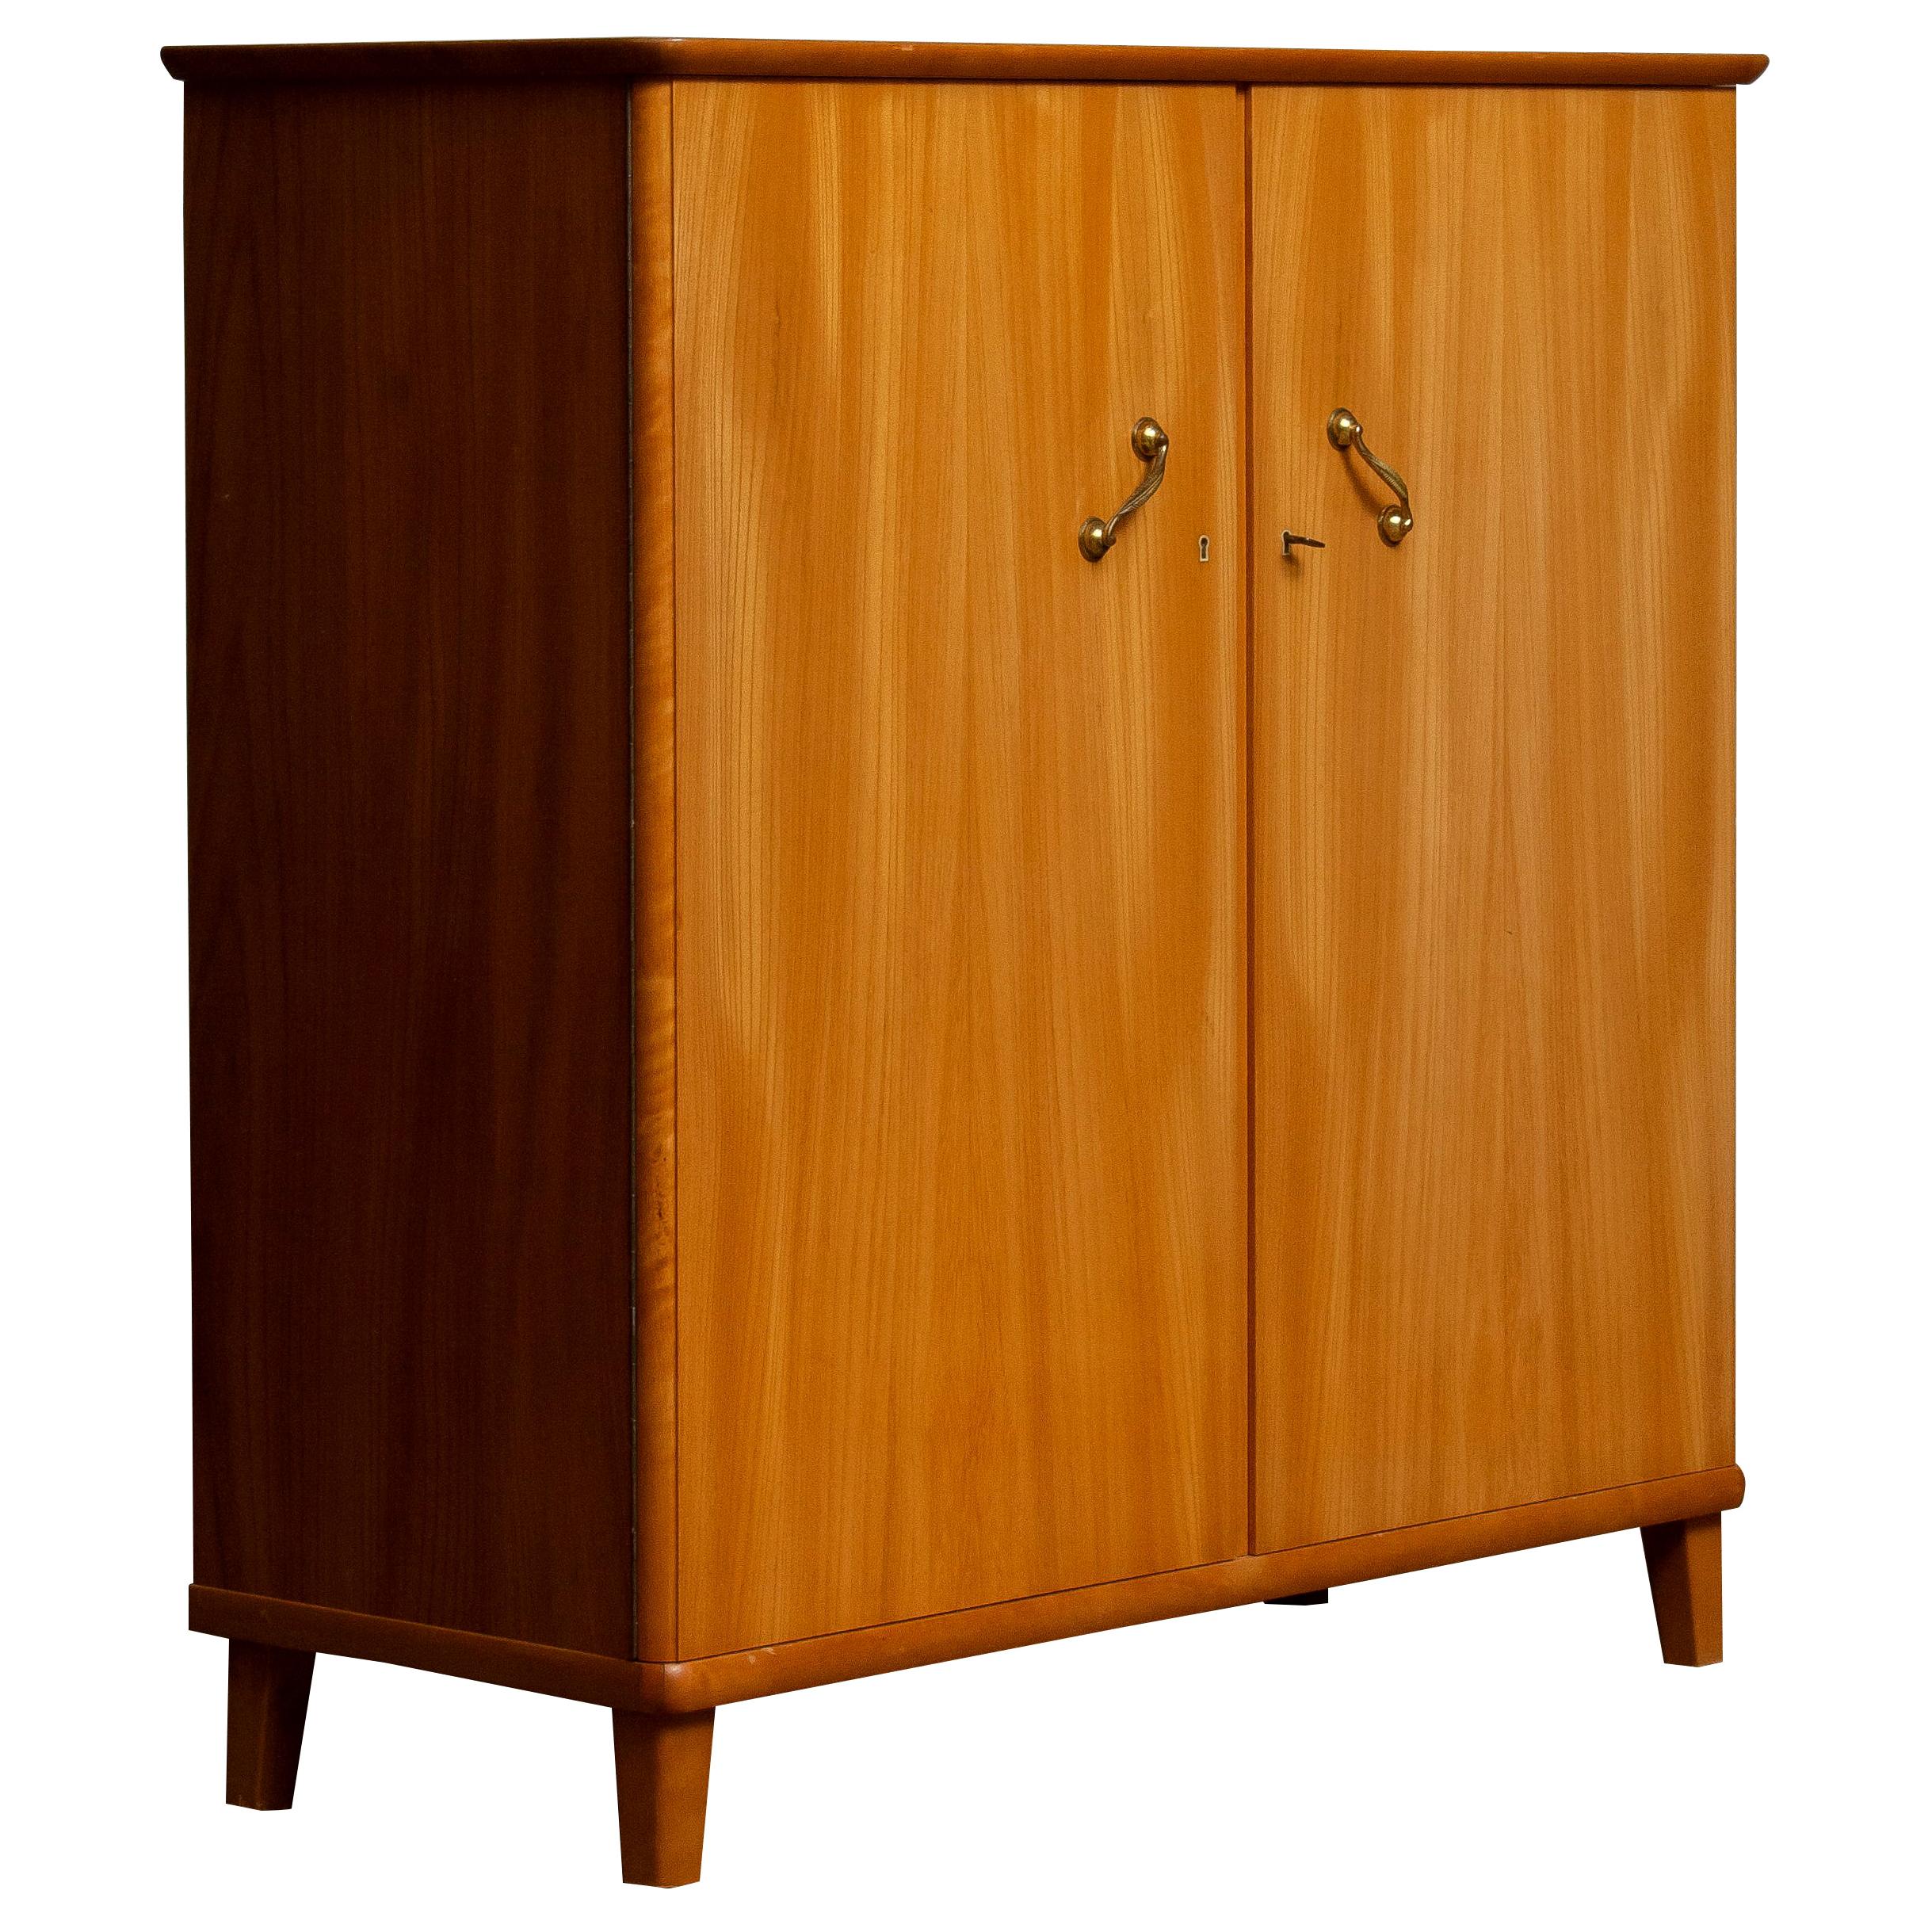 Beautiful cabinet in elm made in Tibro, Sweden.

This cupboard is made up of two front swing doors that can be locked with on the right side two internal drawers and two in height-adjustable shelves. There are also two adjustable shelves on the